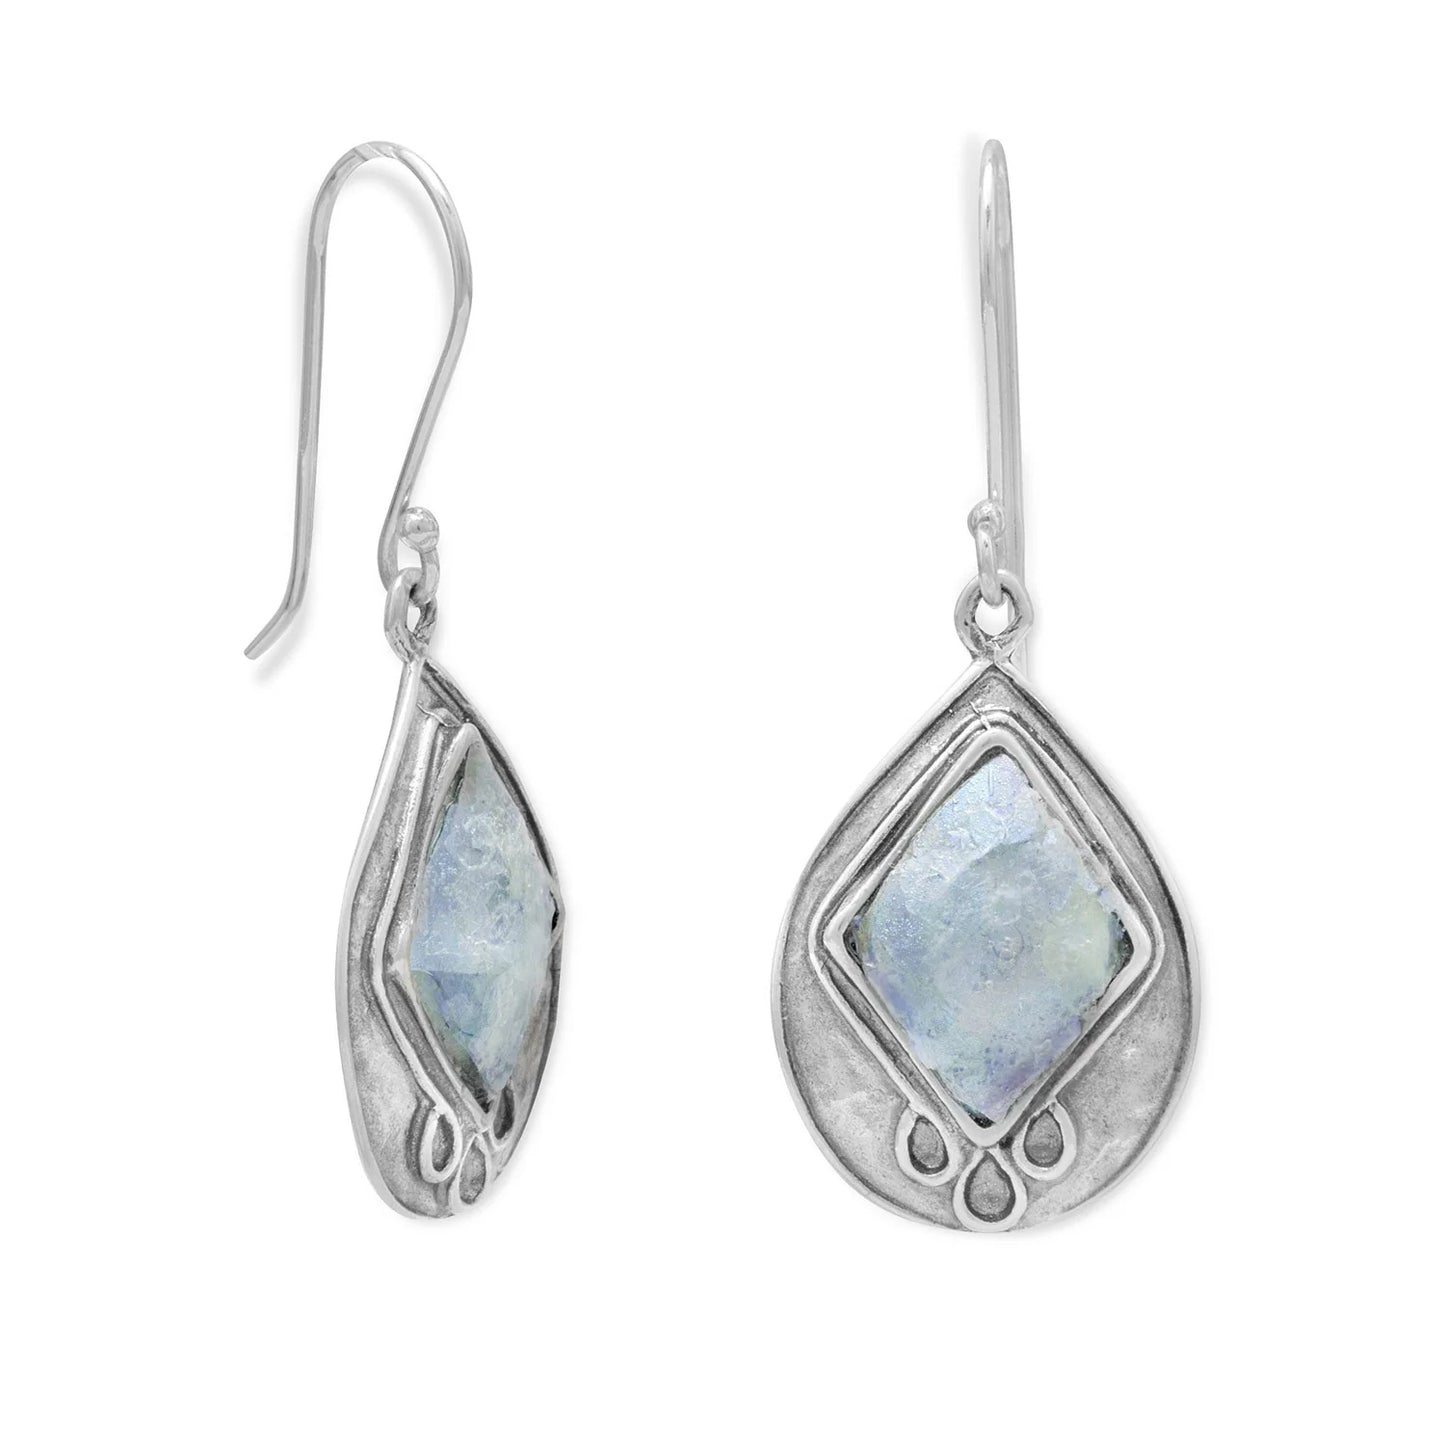 Textured Ancient Roman Glass Earrings